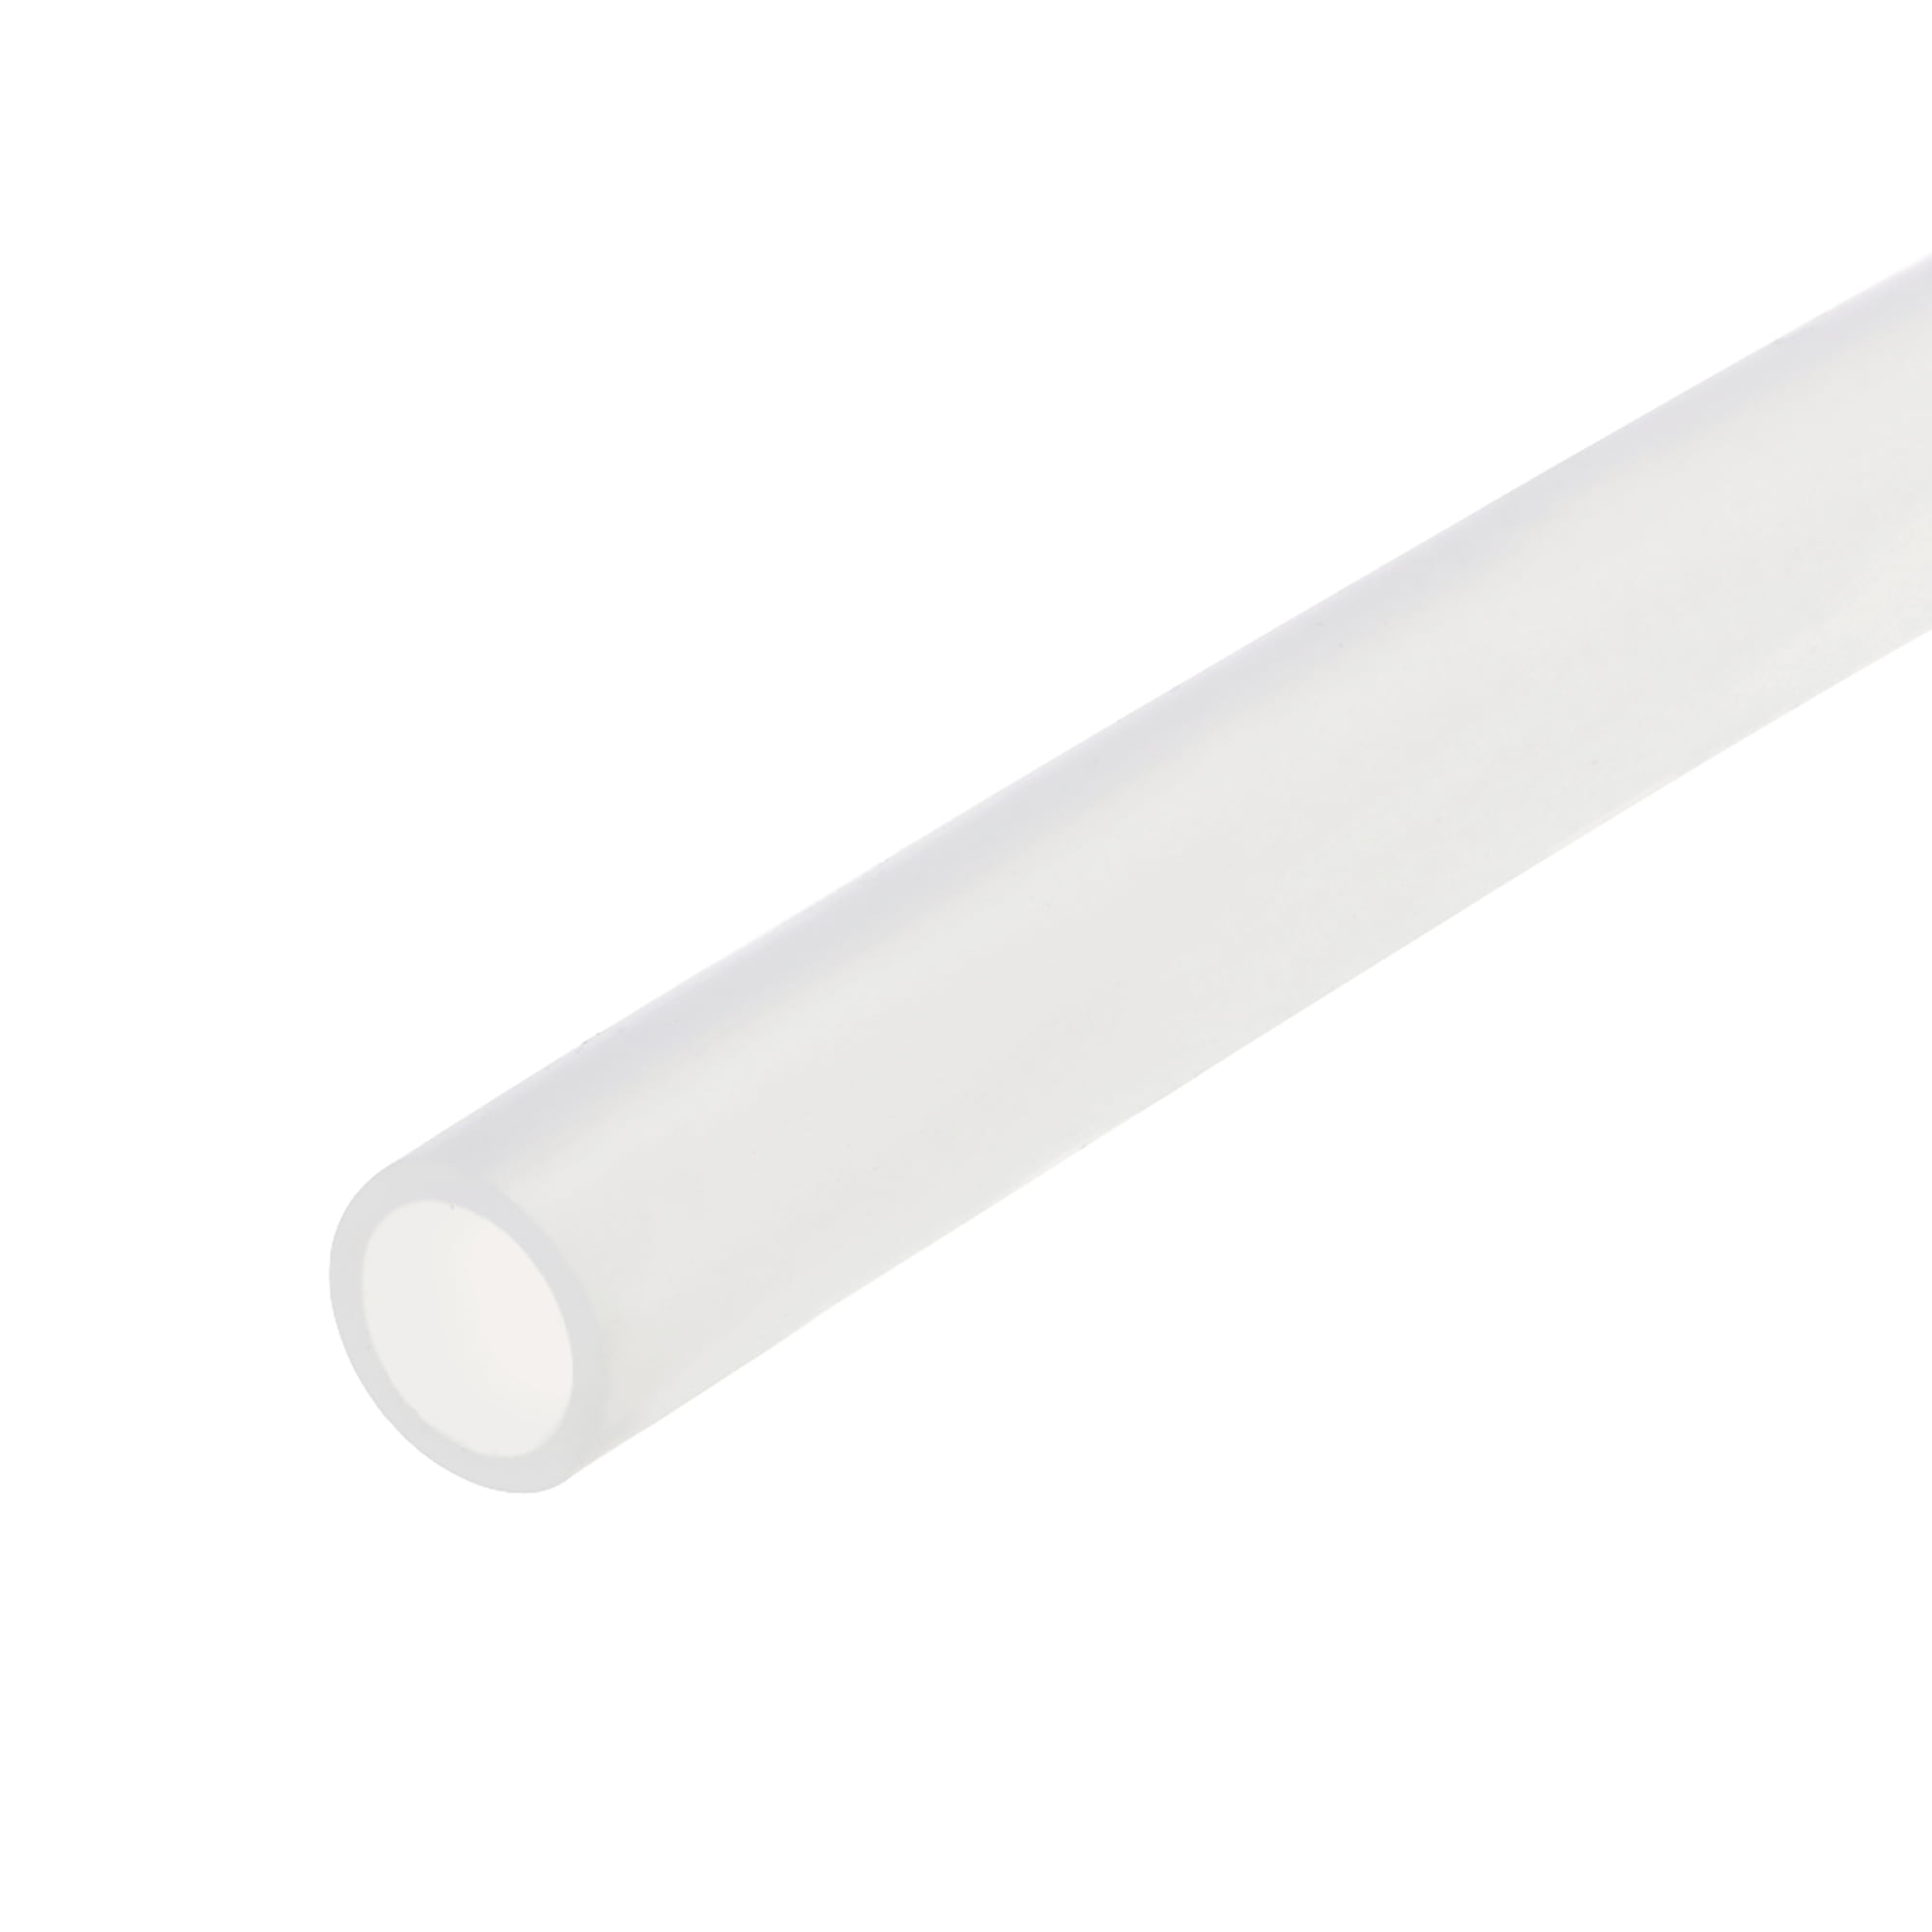 1/8 inch ID x 3/16 inch OD 3 Meter/10ft Tubing White Silicone Tube 